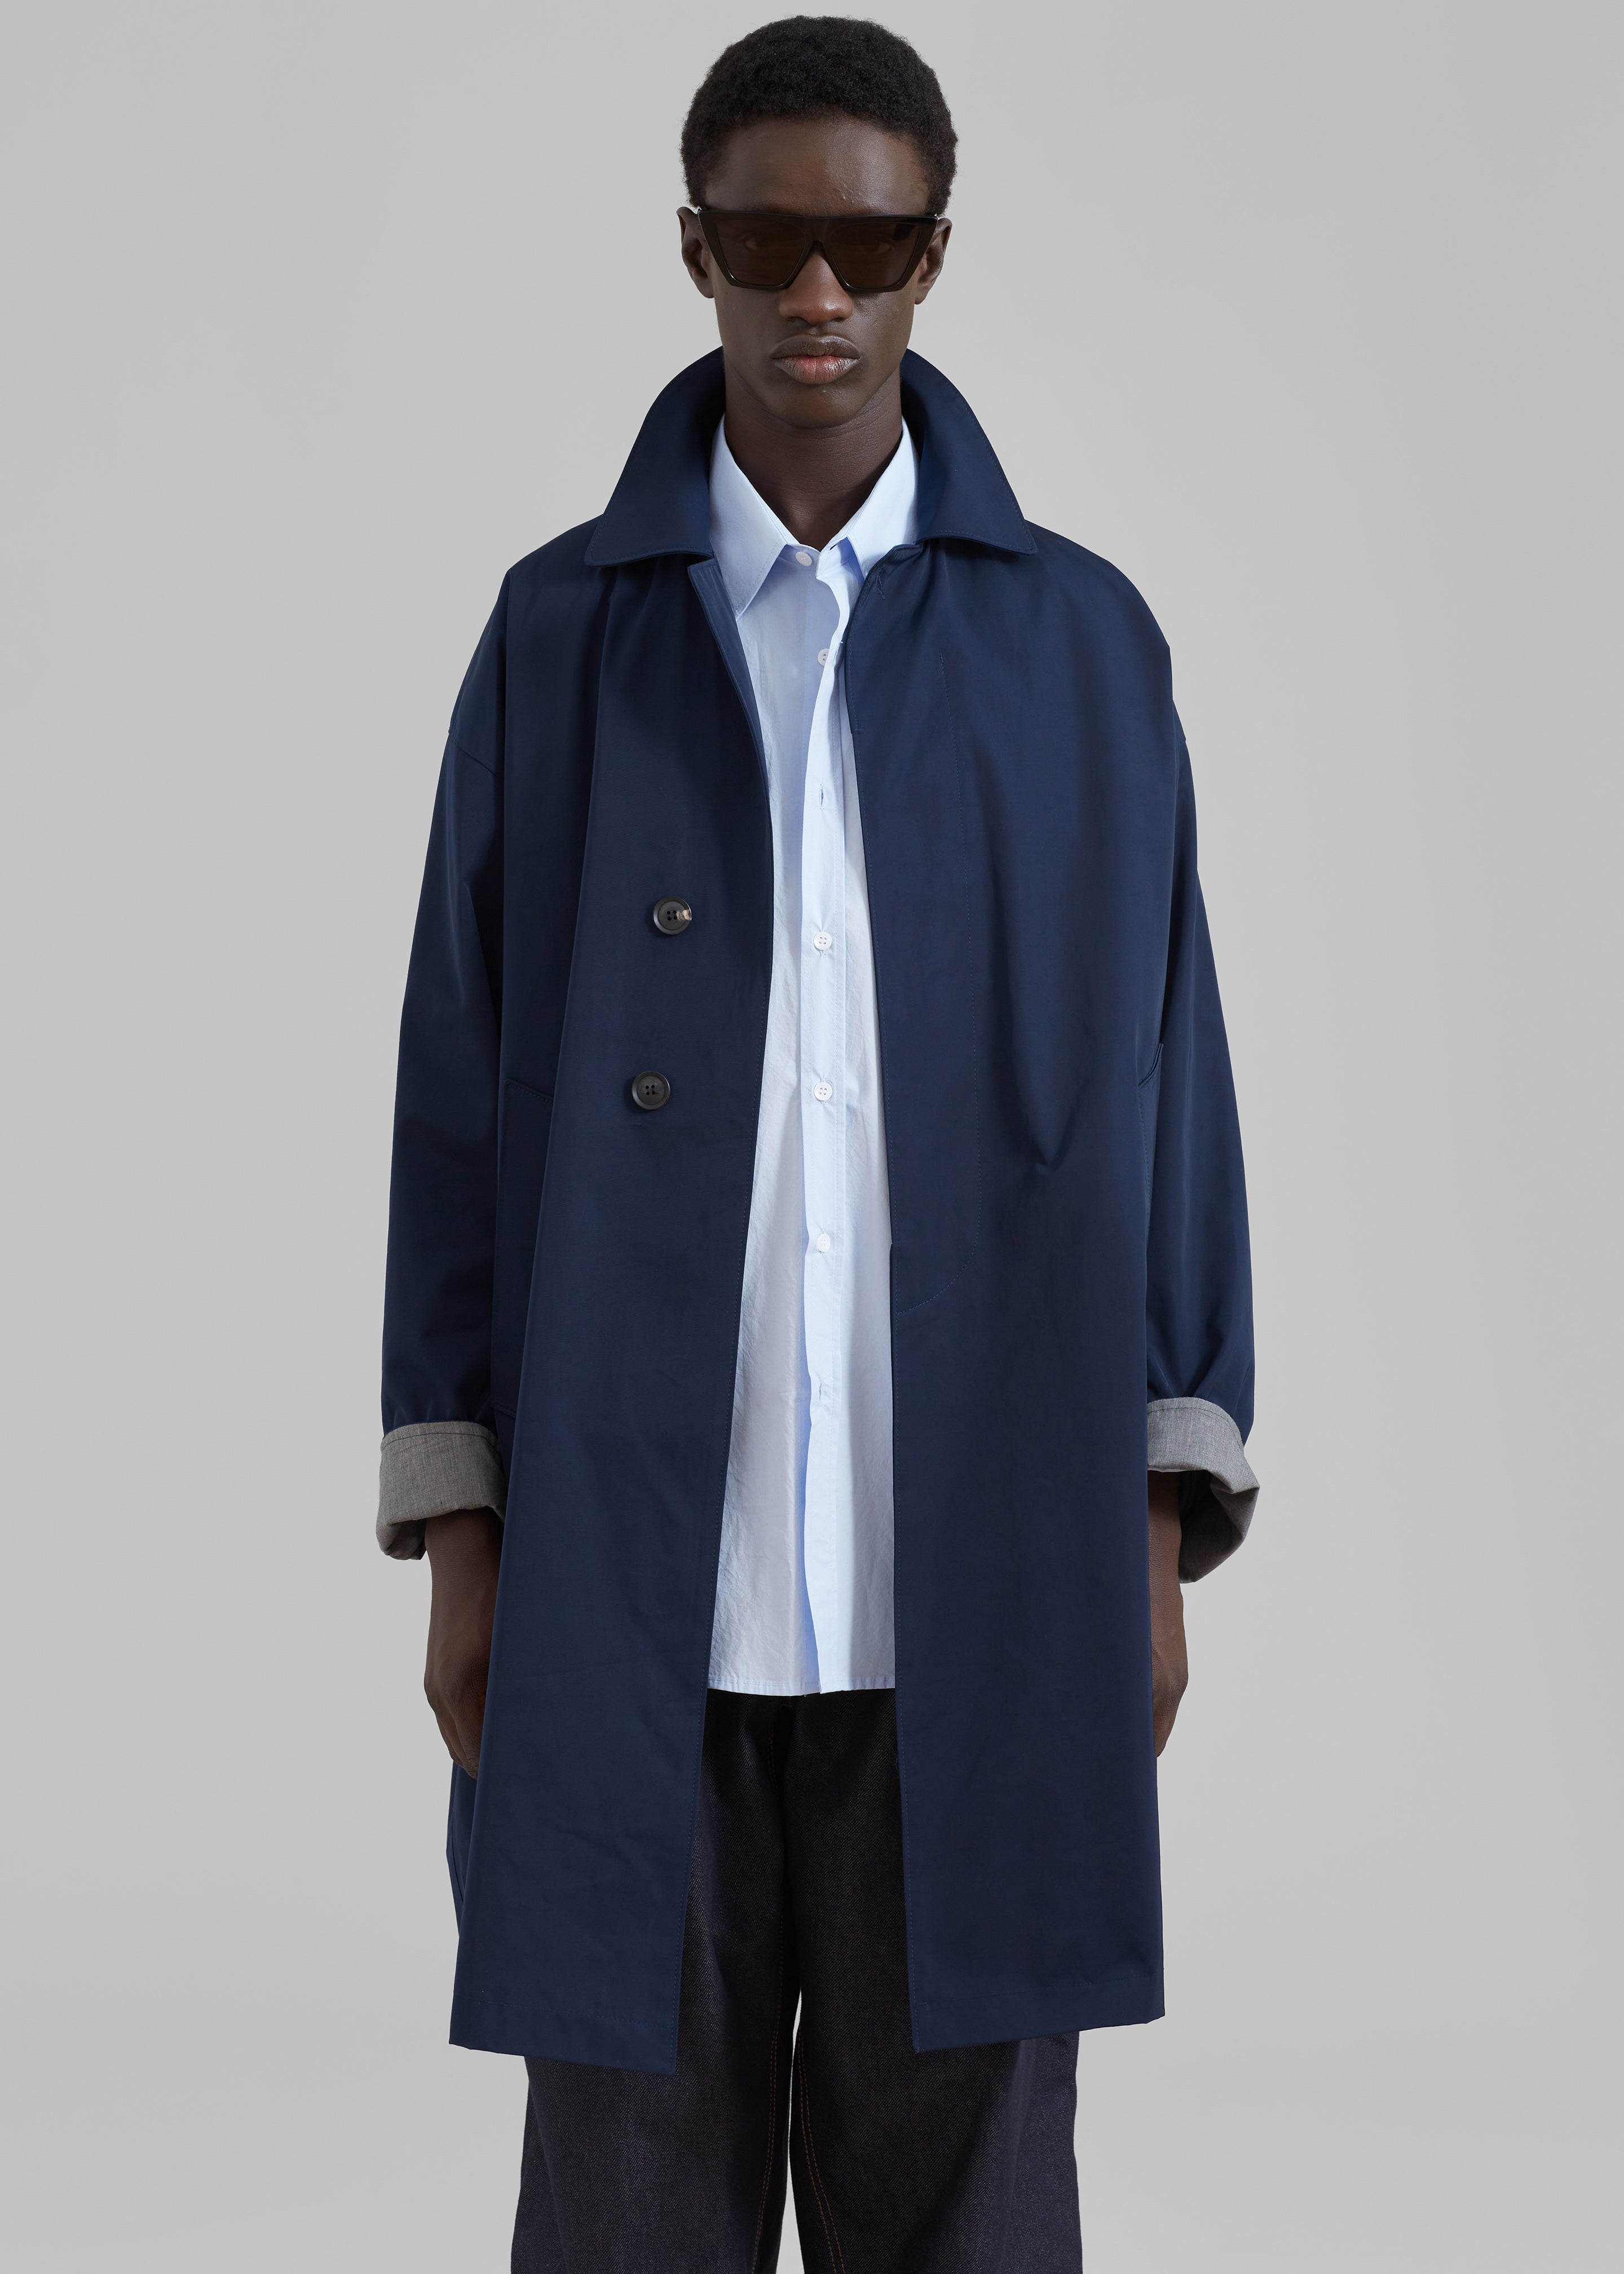 Peter Trench Coat - Navy – Frankie Shop Europe